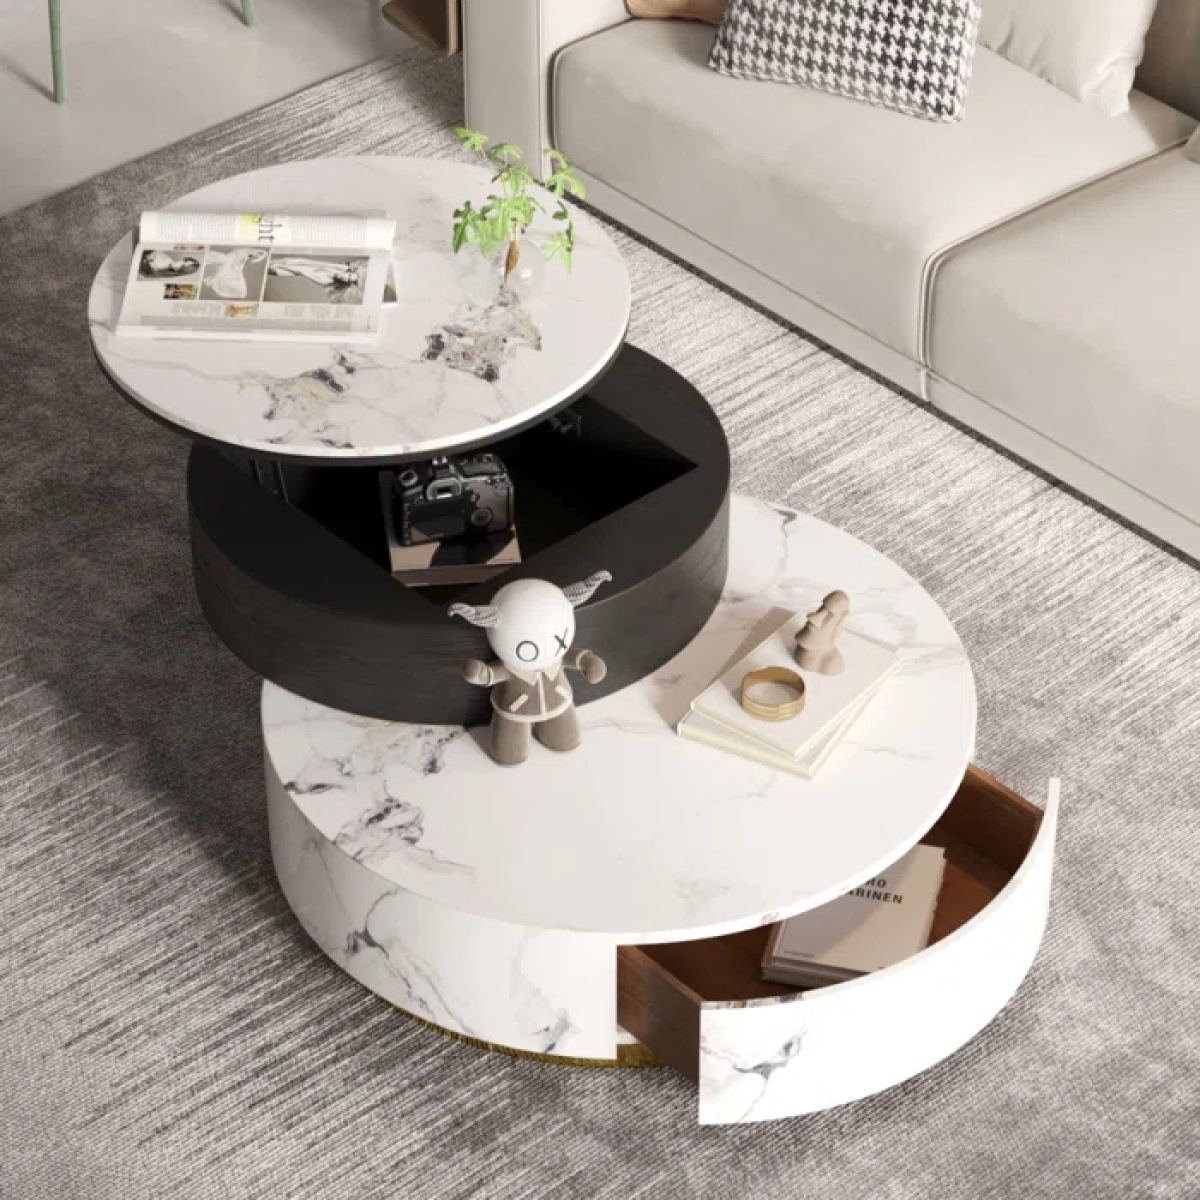 WoodFX woodefurniture Round White Coffee Table, 360° Rotated Lift Top Coffee Table with Hidden Storage